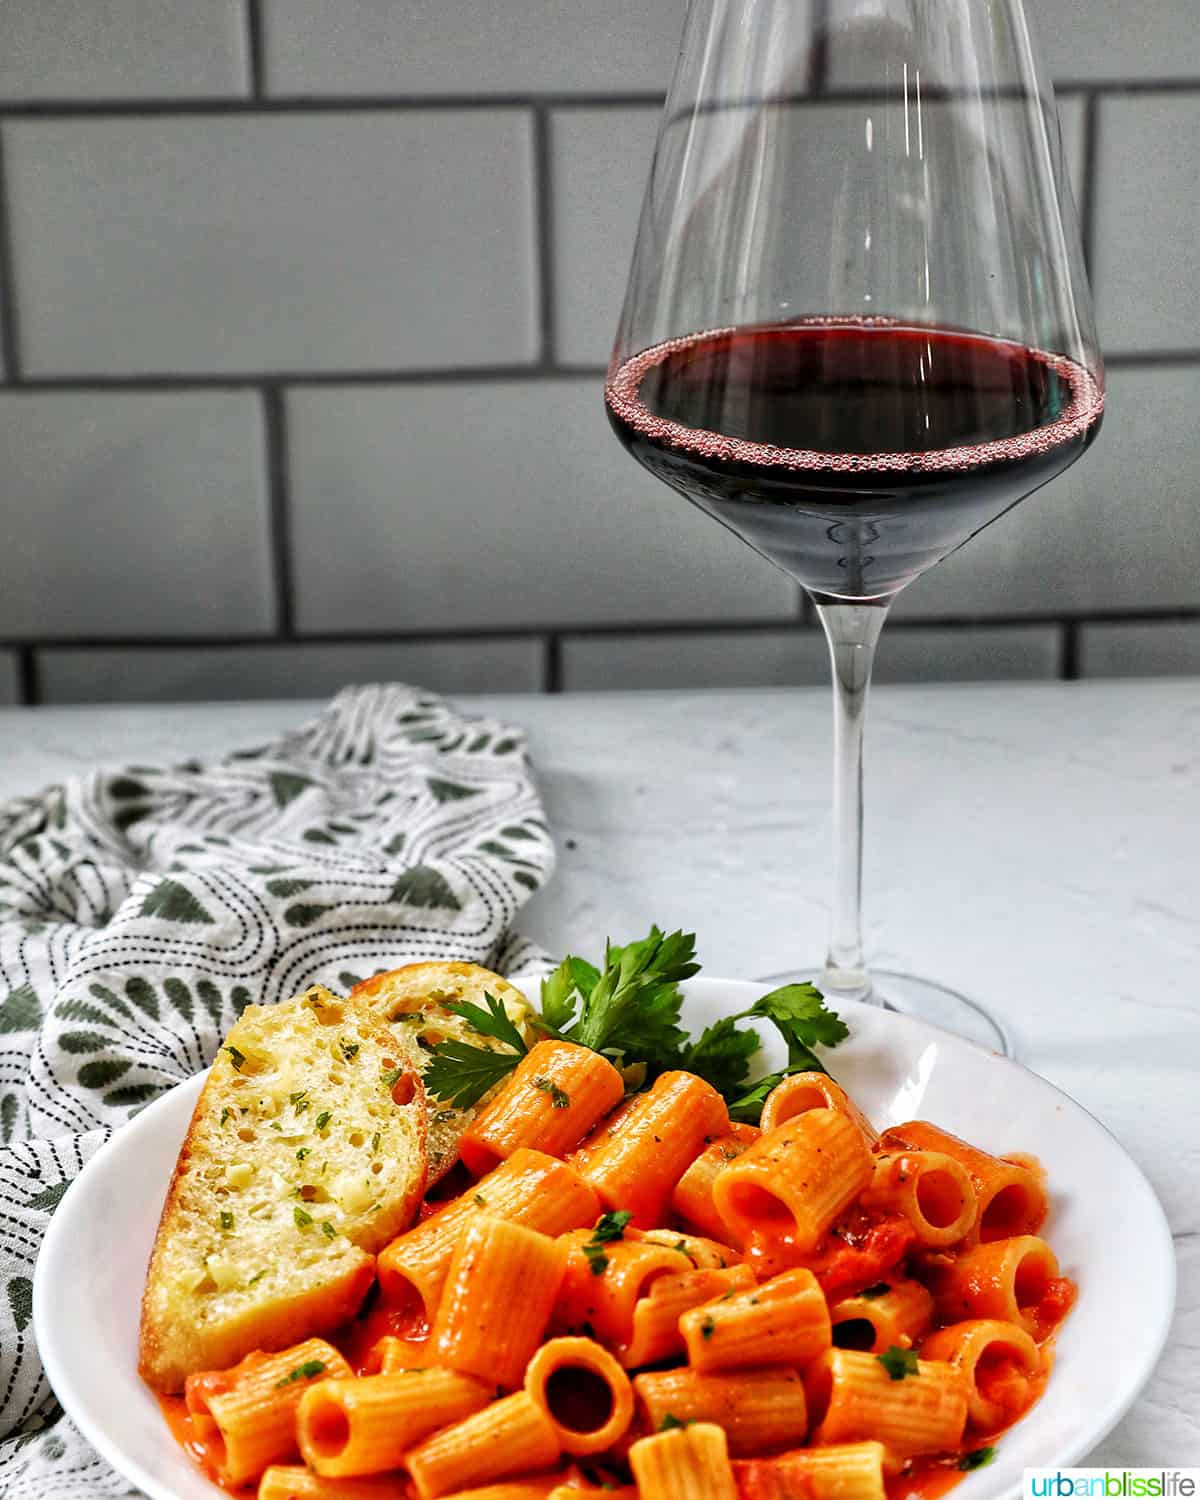 glass of red wine with white bowl with rigatoni with vodka sauce and side of garlic bread and parsley.